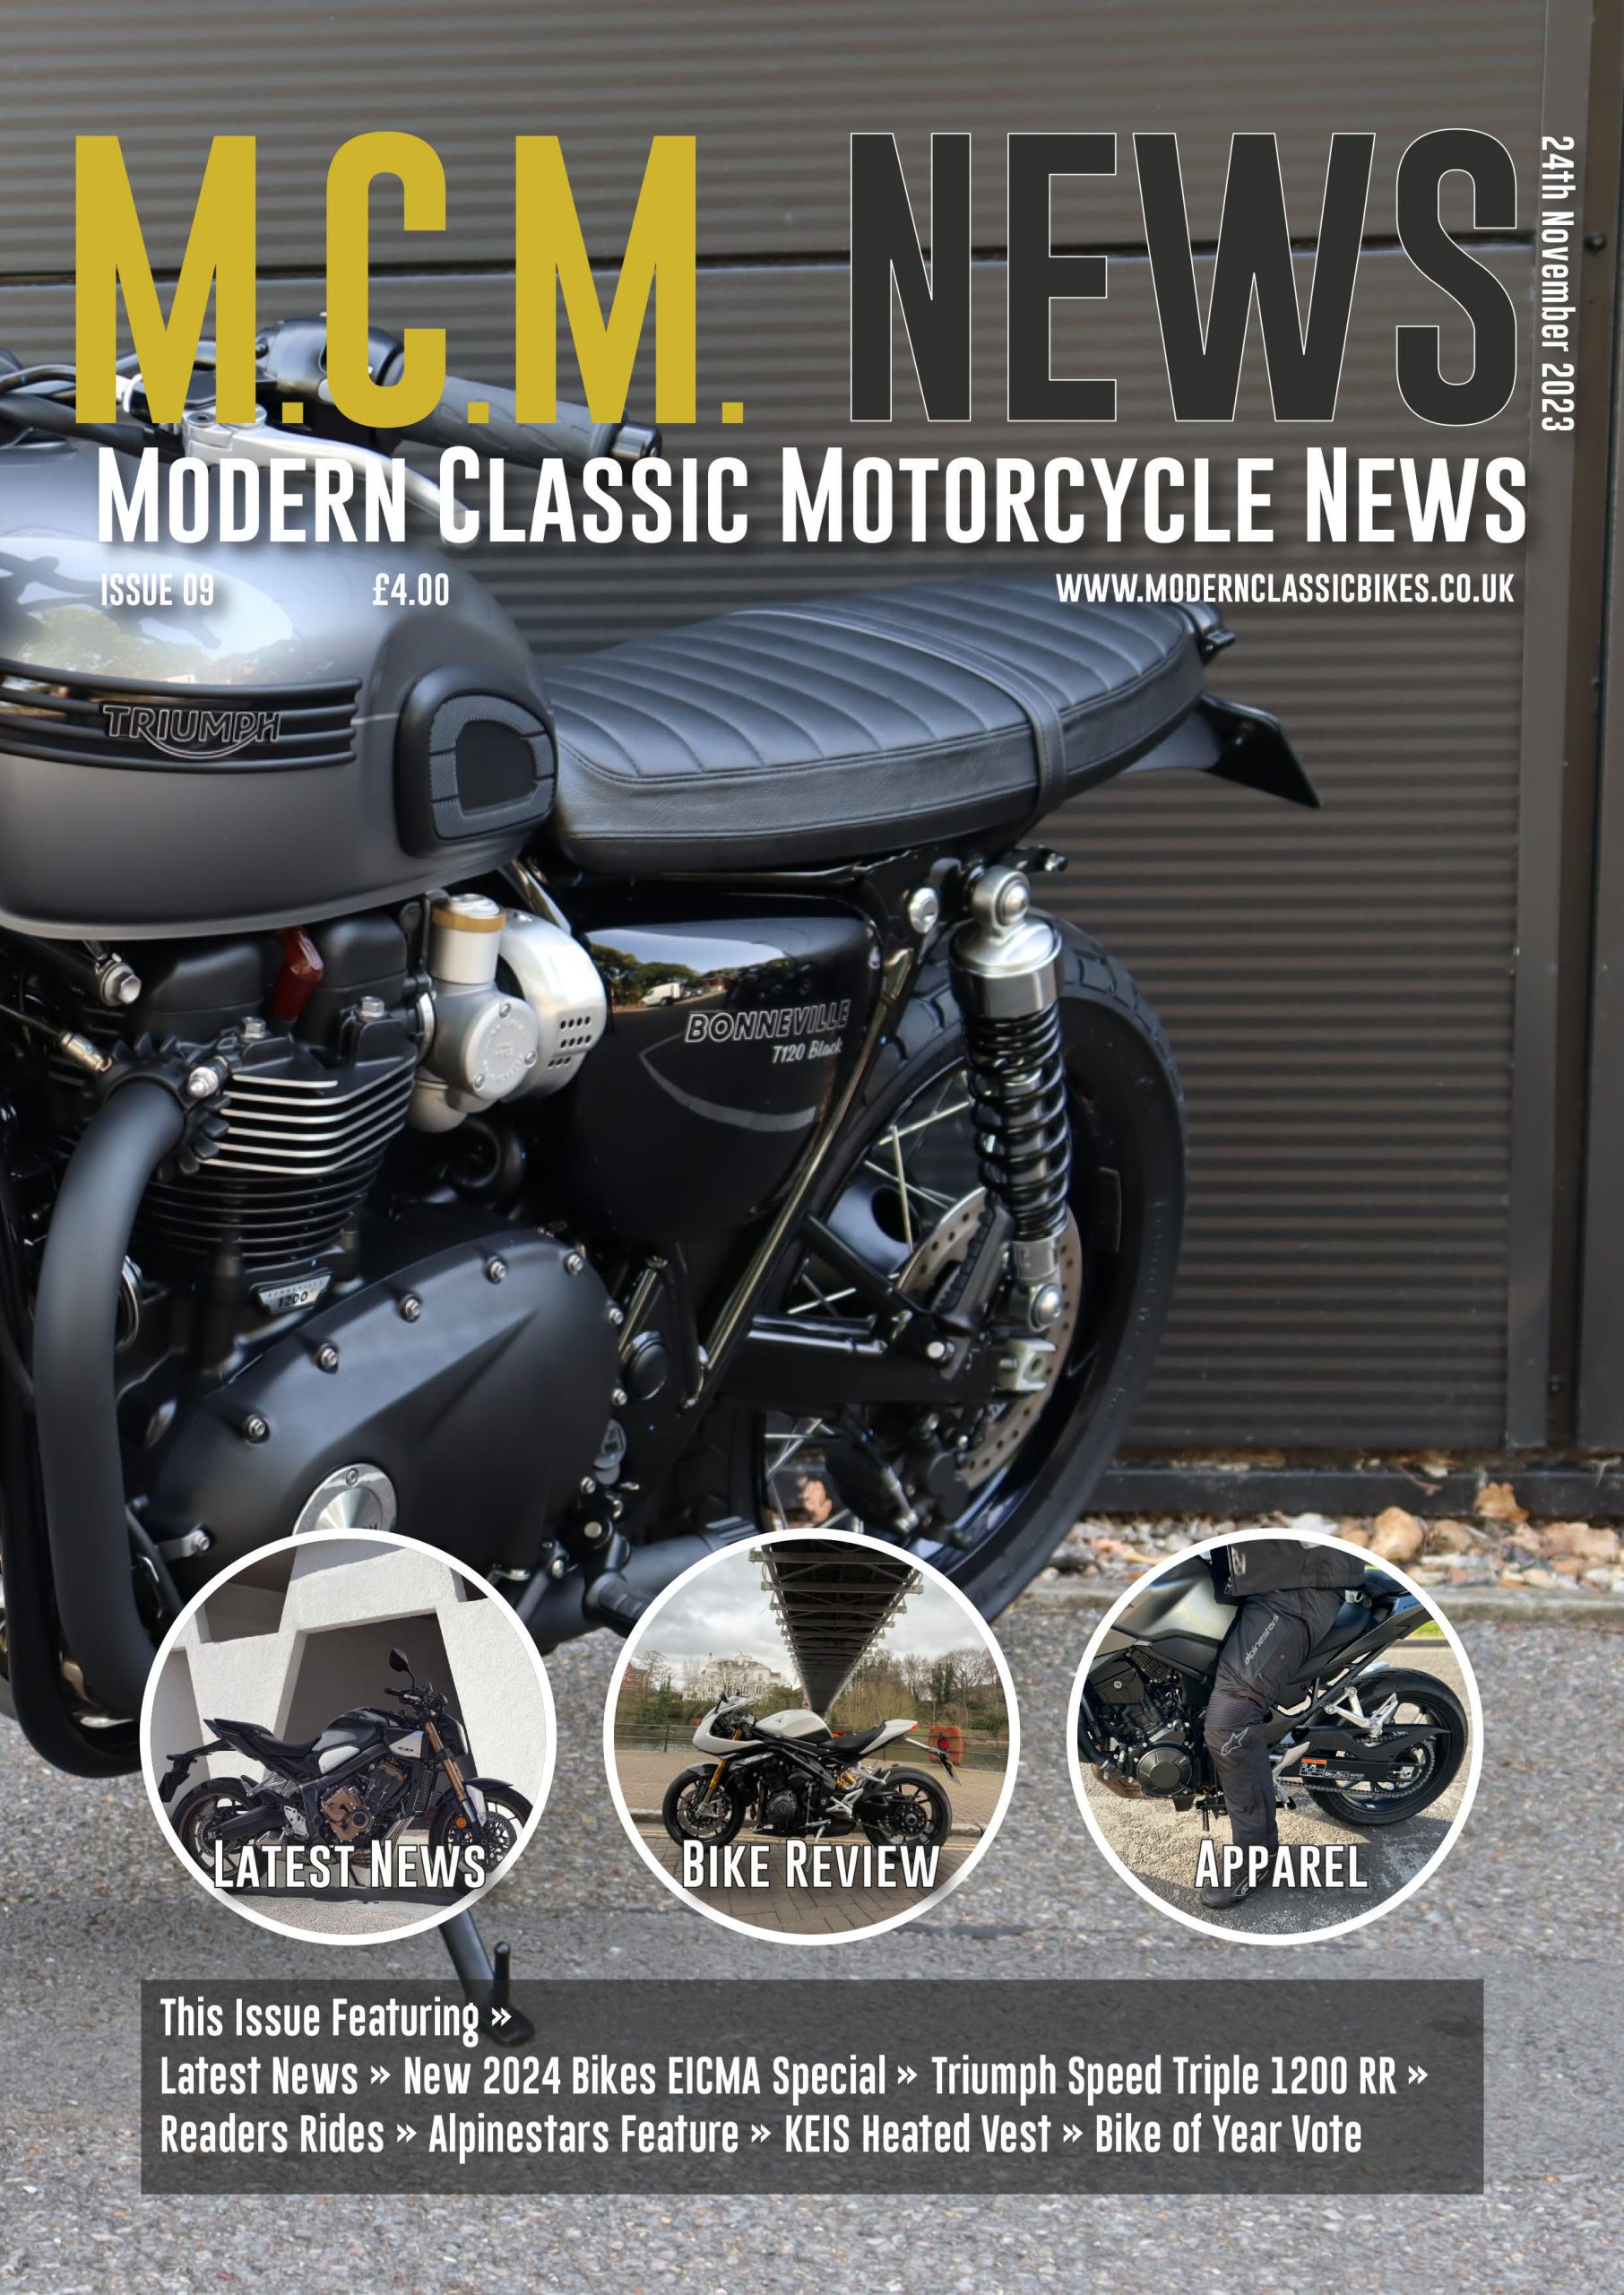 Pre-order Issue 9 - Modern Classic Motorcycle News